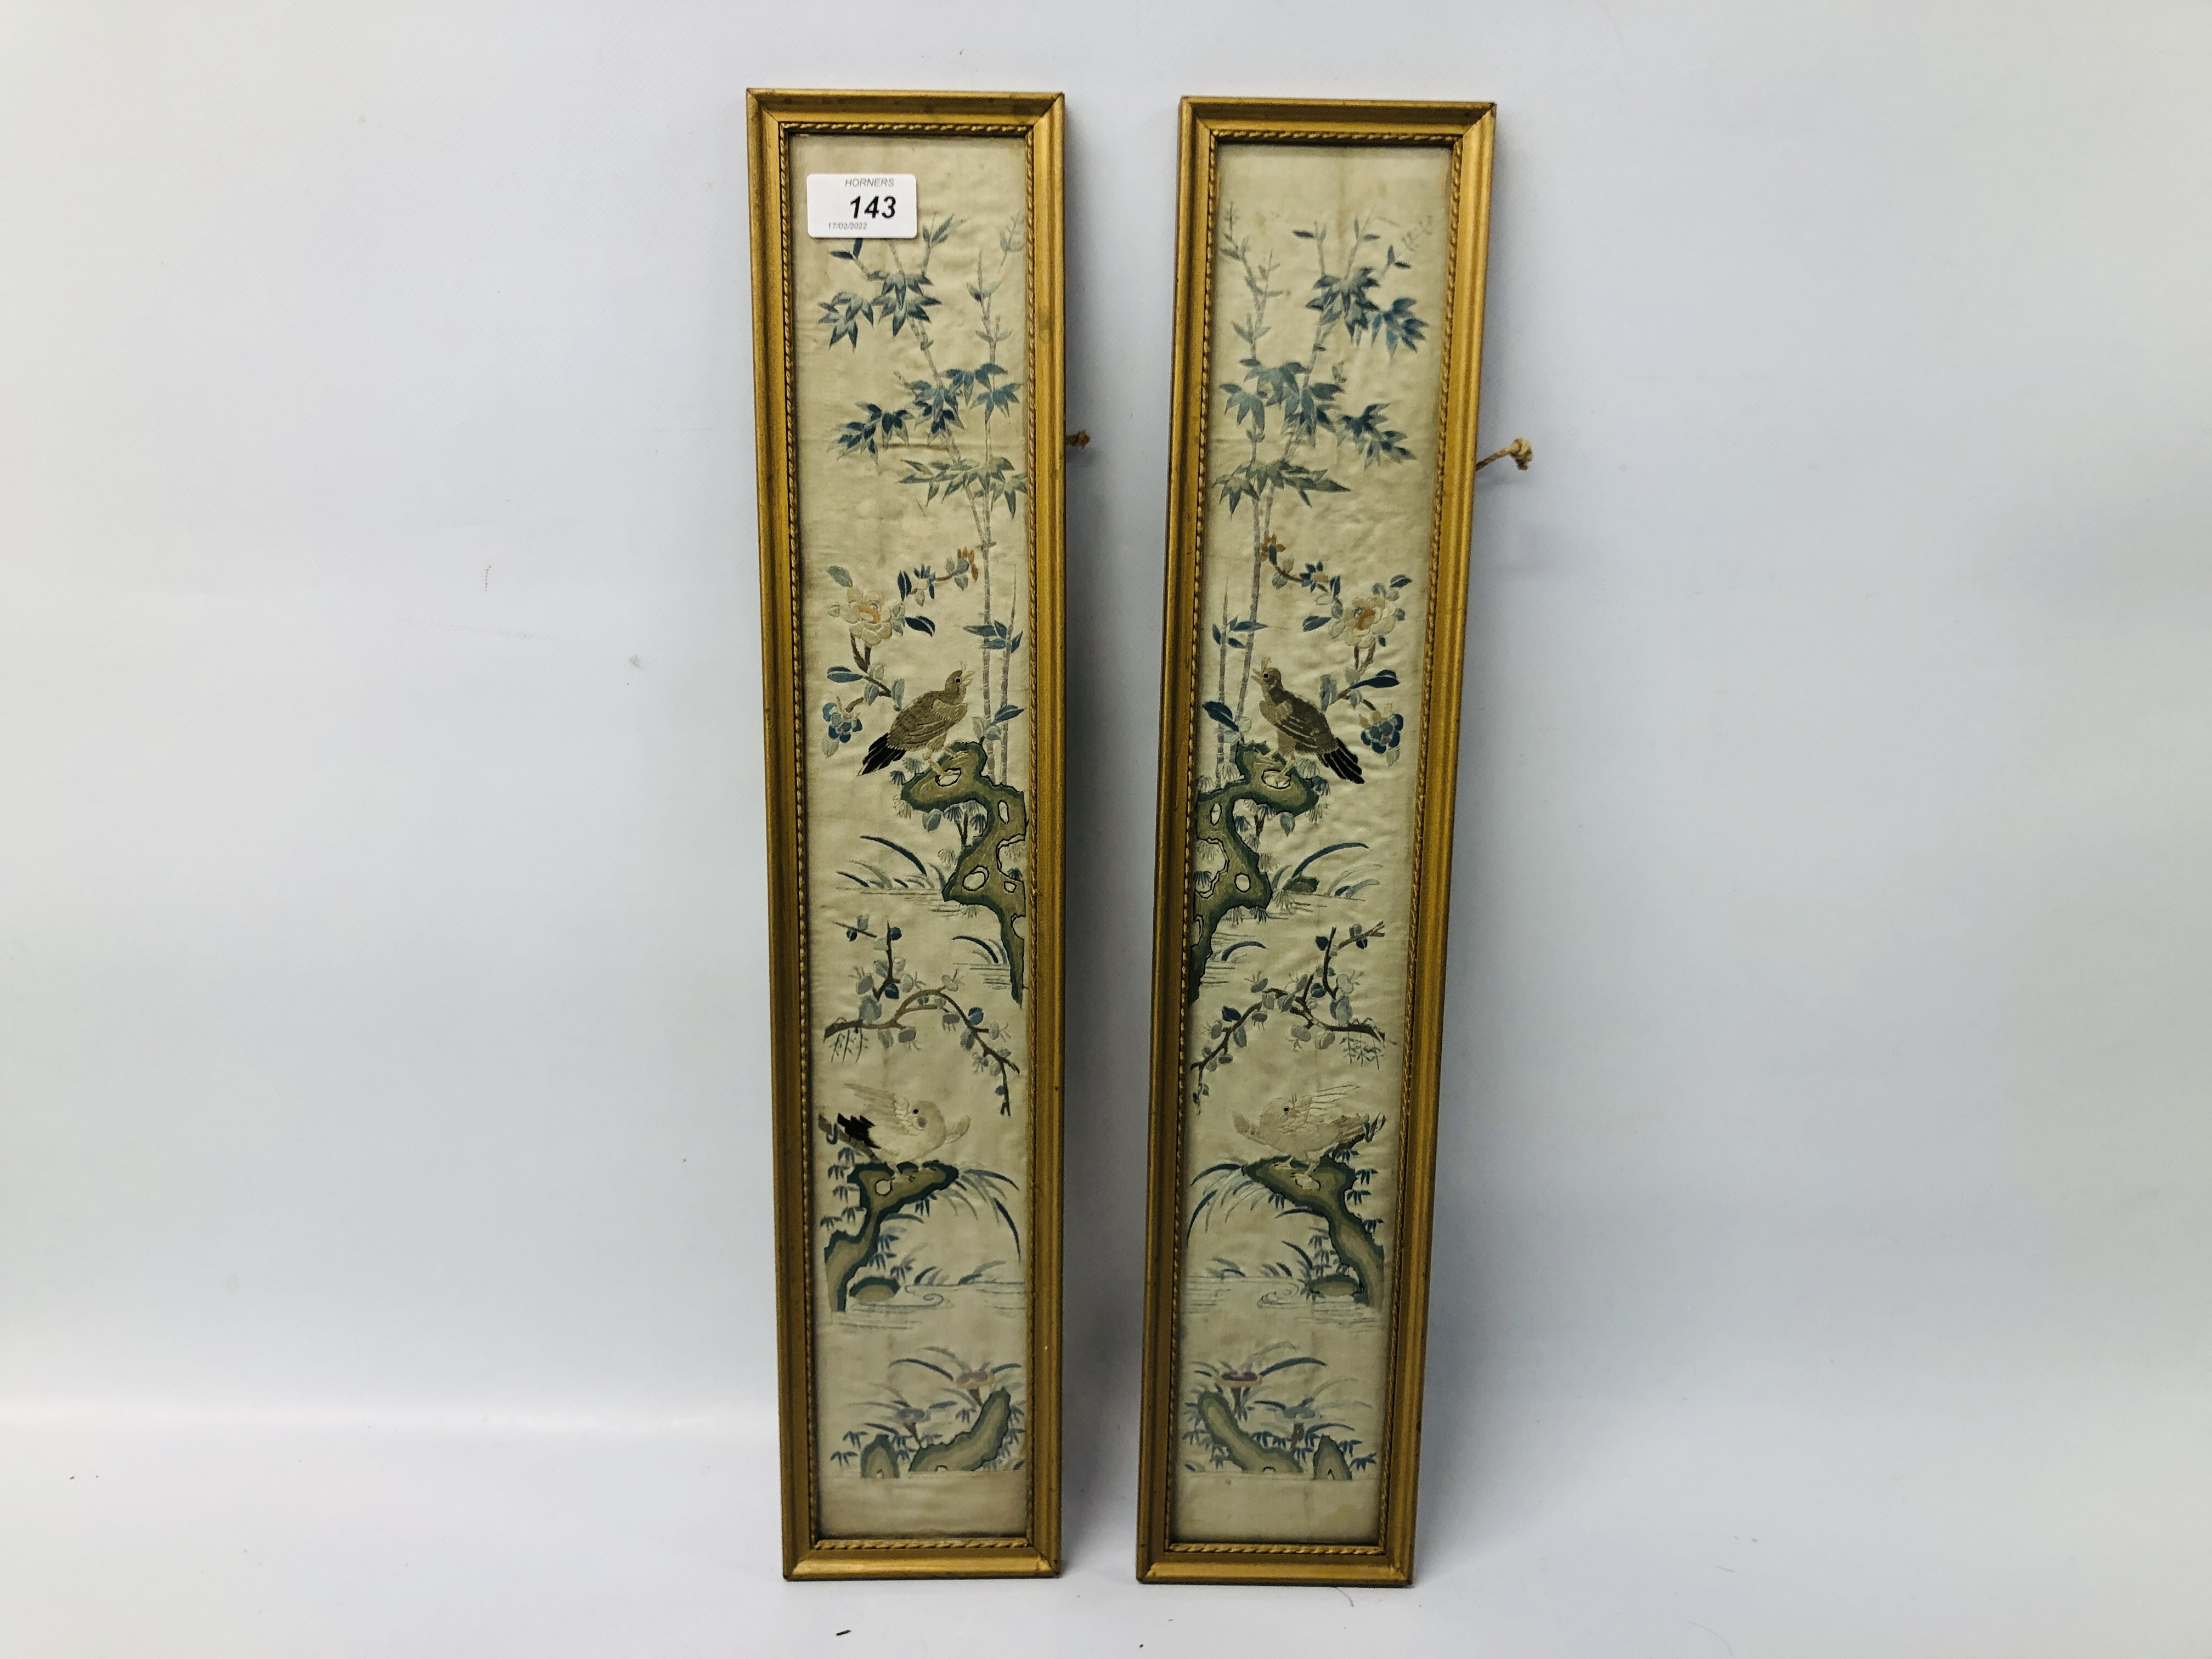 A PAIR OF C19TH CHINESE EMBROIDERIES OF BIRDS, ROCKS AND TREES EACH 54 X 9CM.